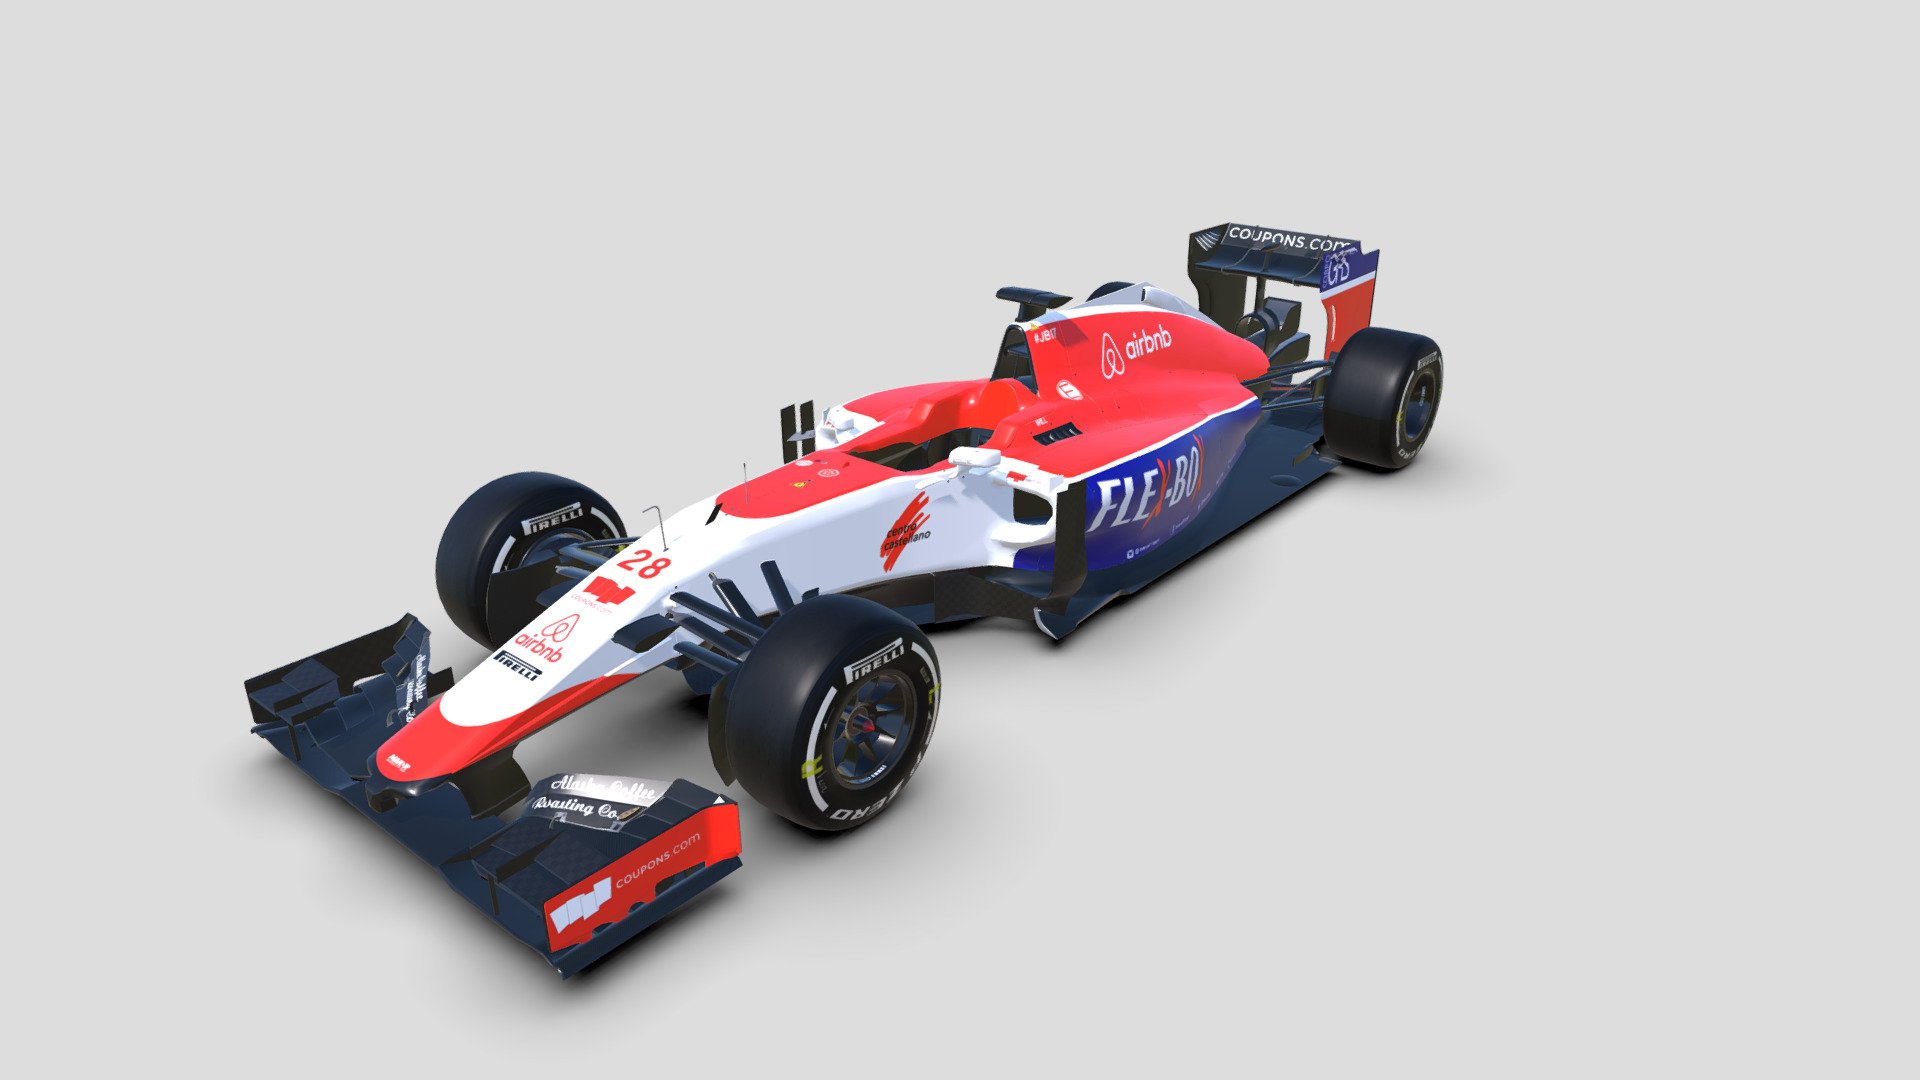 Manor F1 - Mexico GP, 3D model for Grand Prix 4.
New mapping and shape update - Manor F1 - Mexico - 3D model by Excalibur 3d model